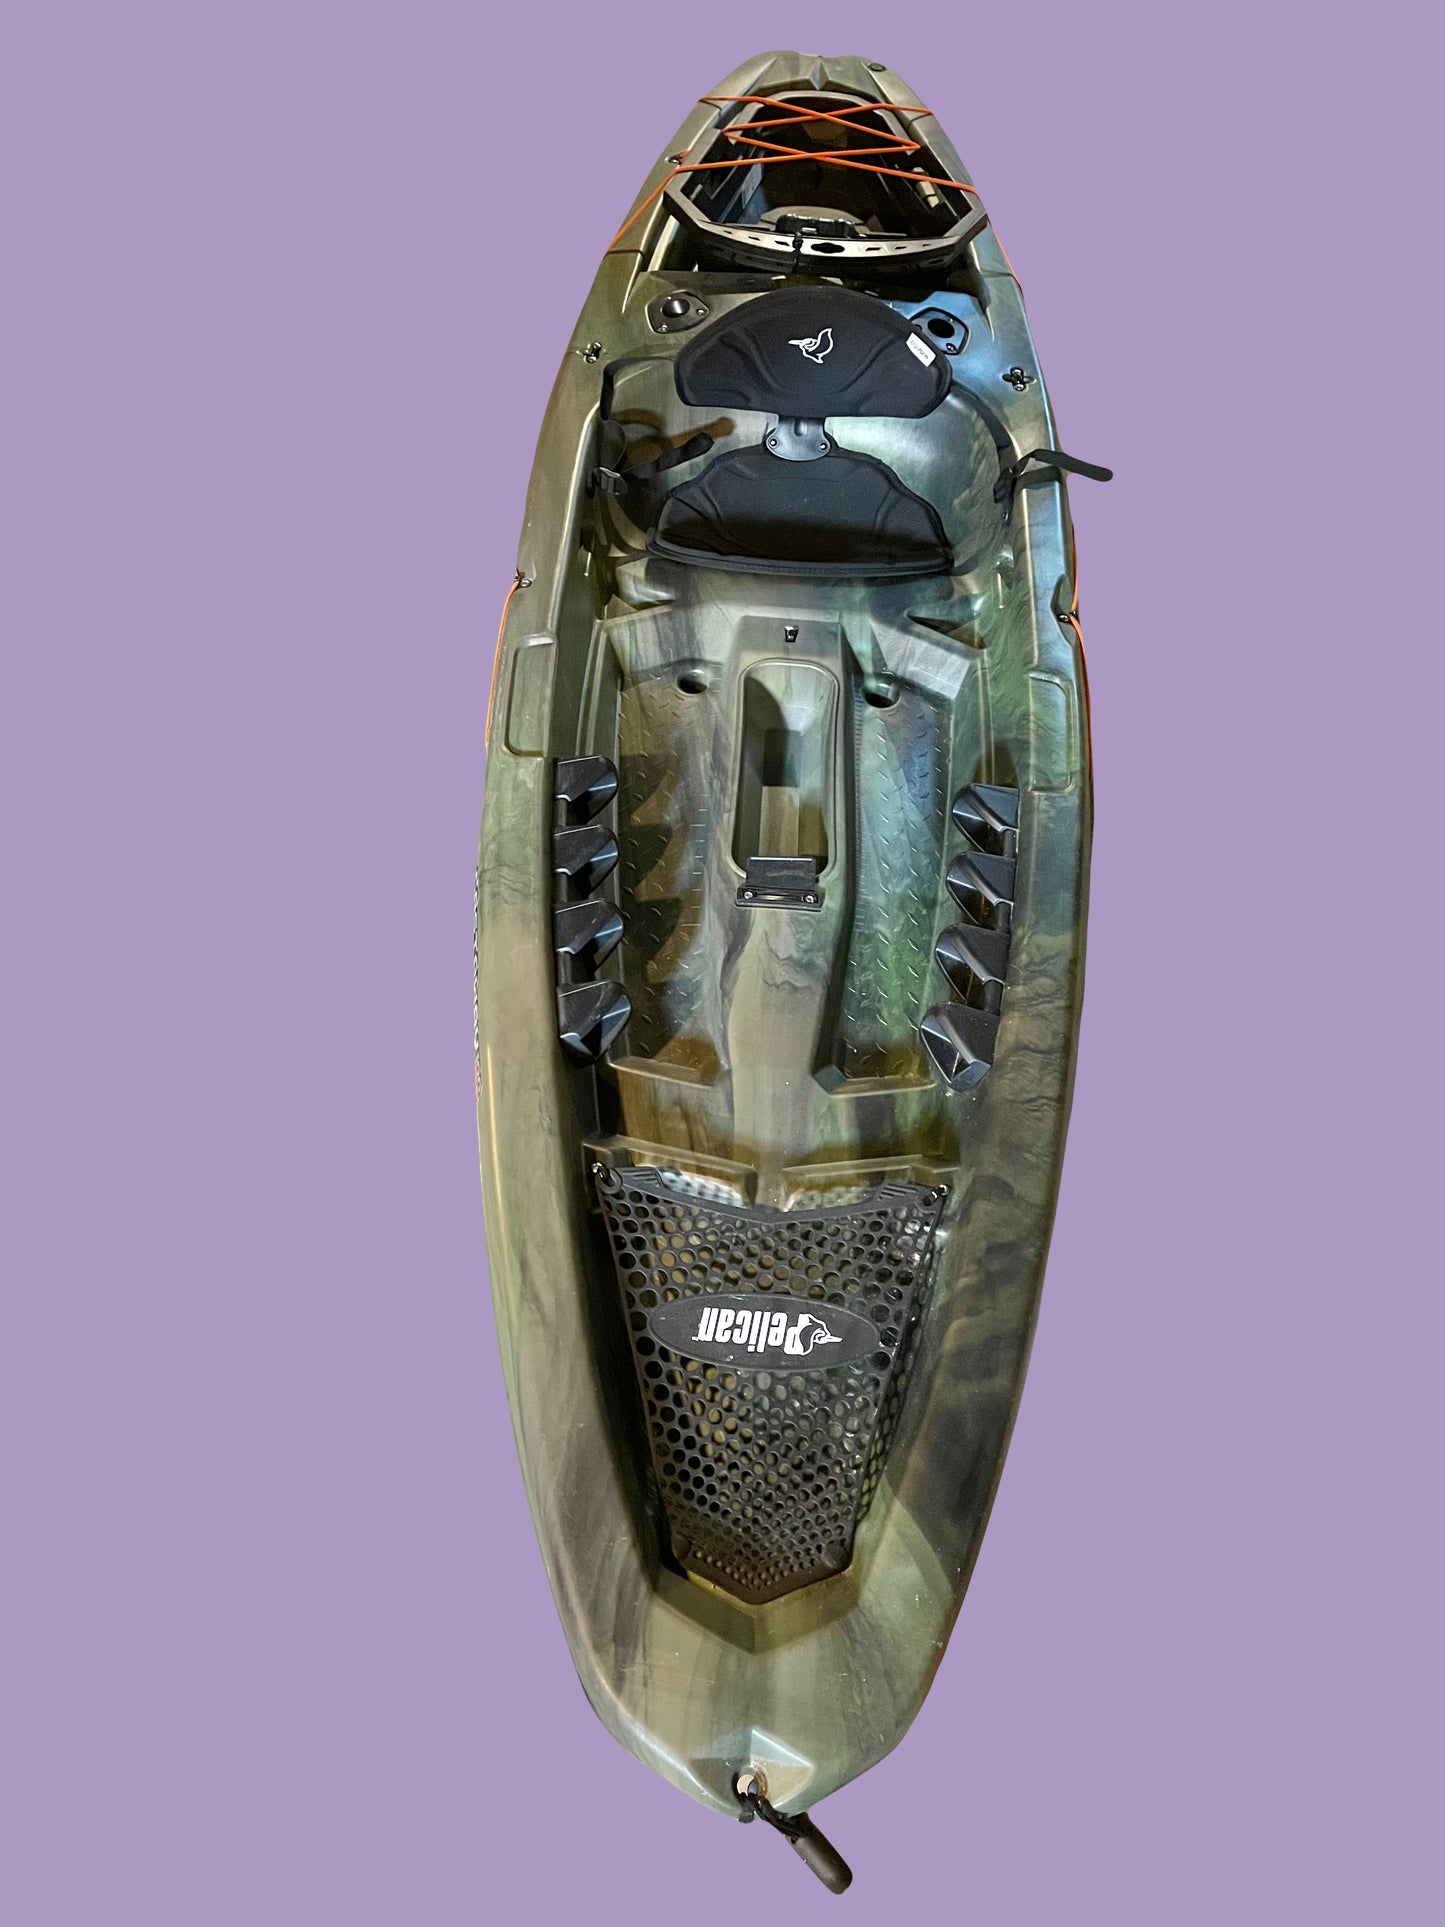 Pelican Castaway fishing kayak (local purchase only)